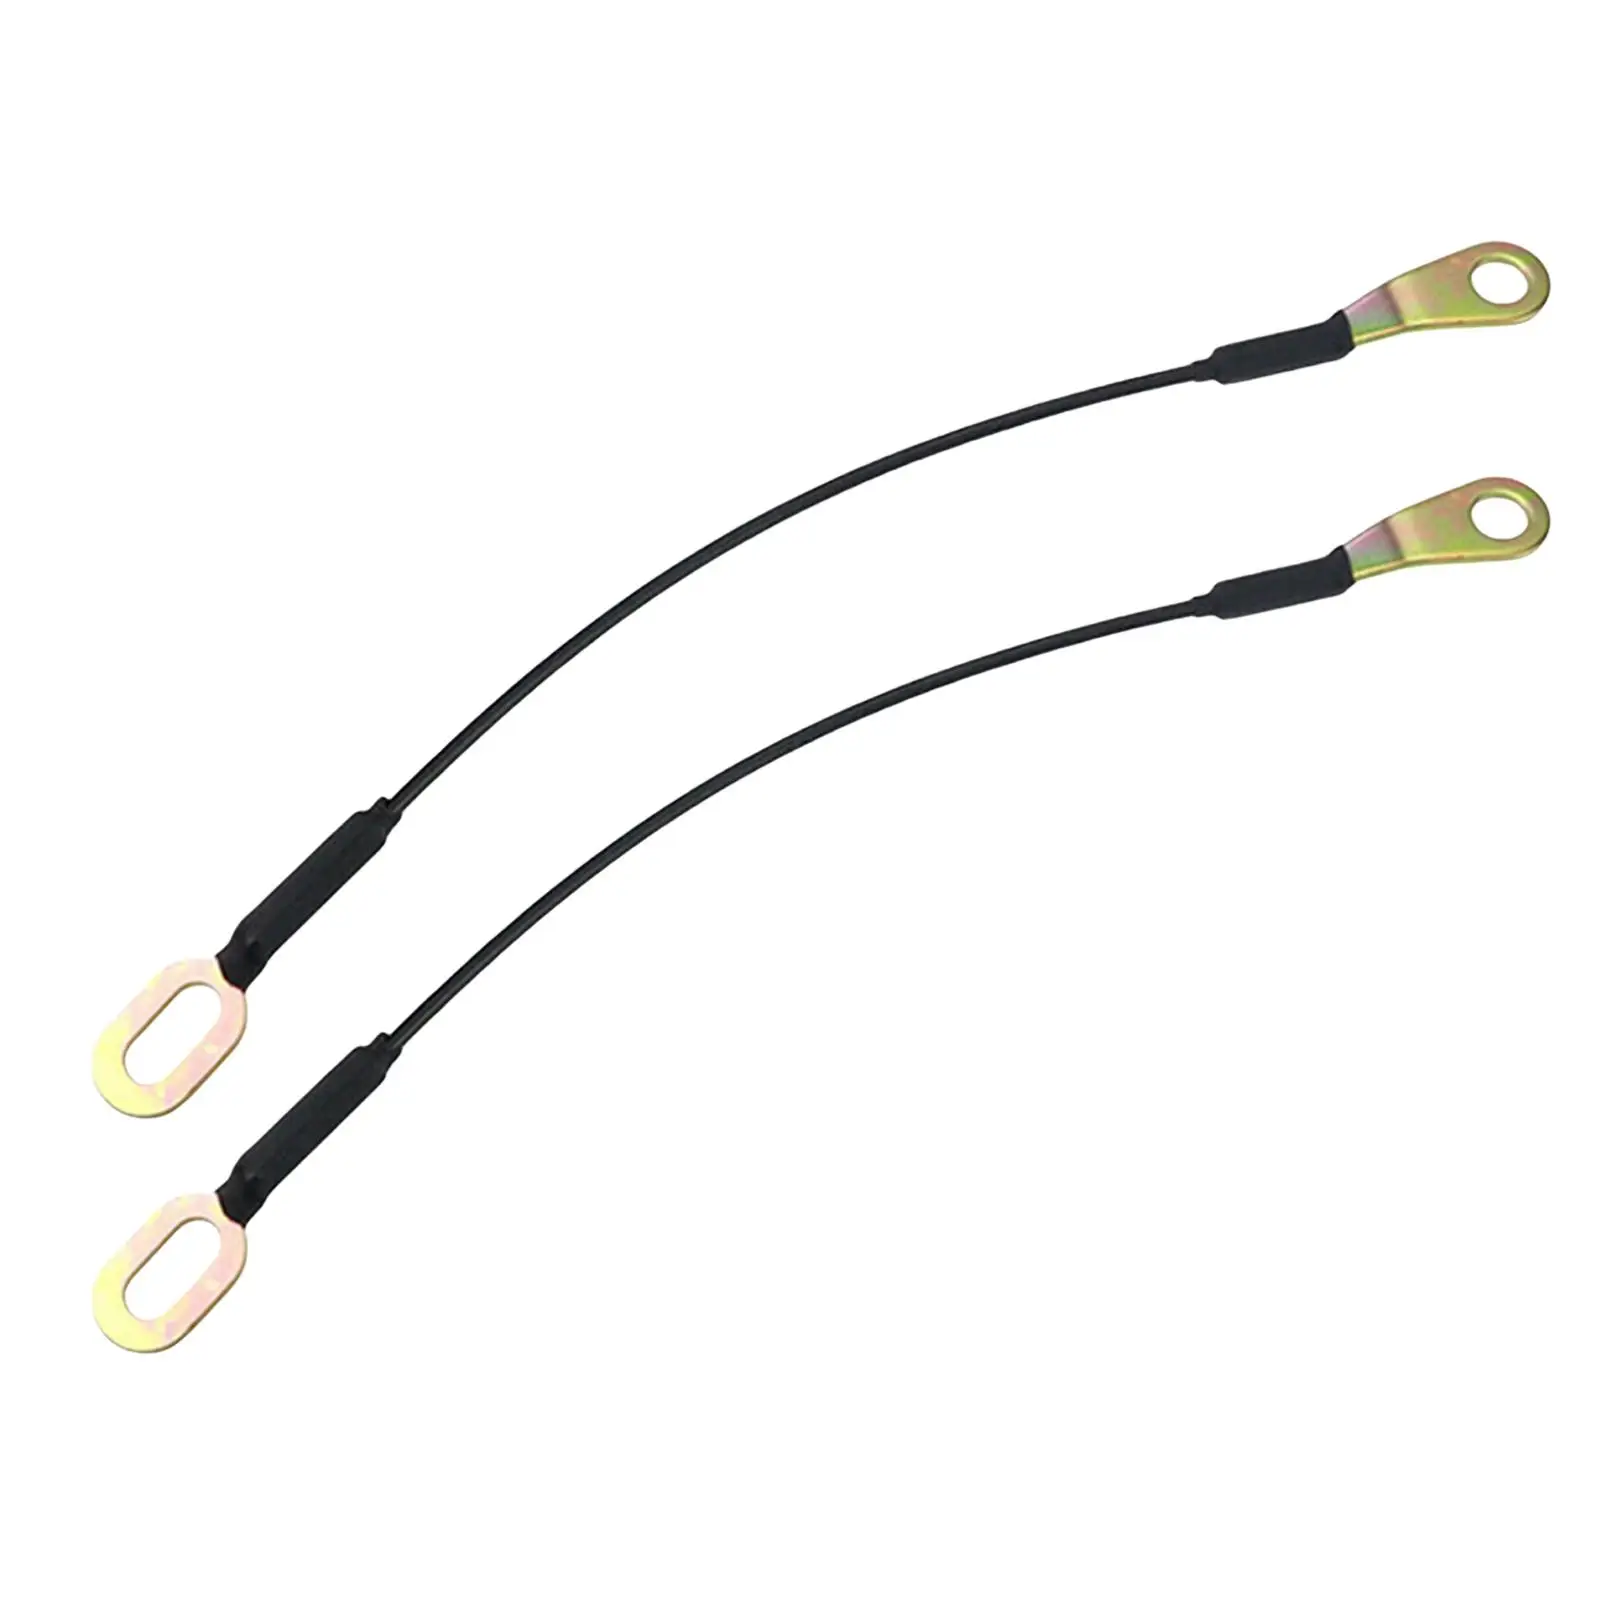 Pack of 2 Tailgate Cables UH70-65-760 replacements for Ford Ranger XLT